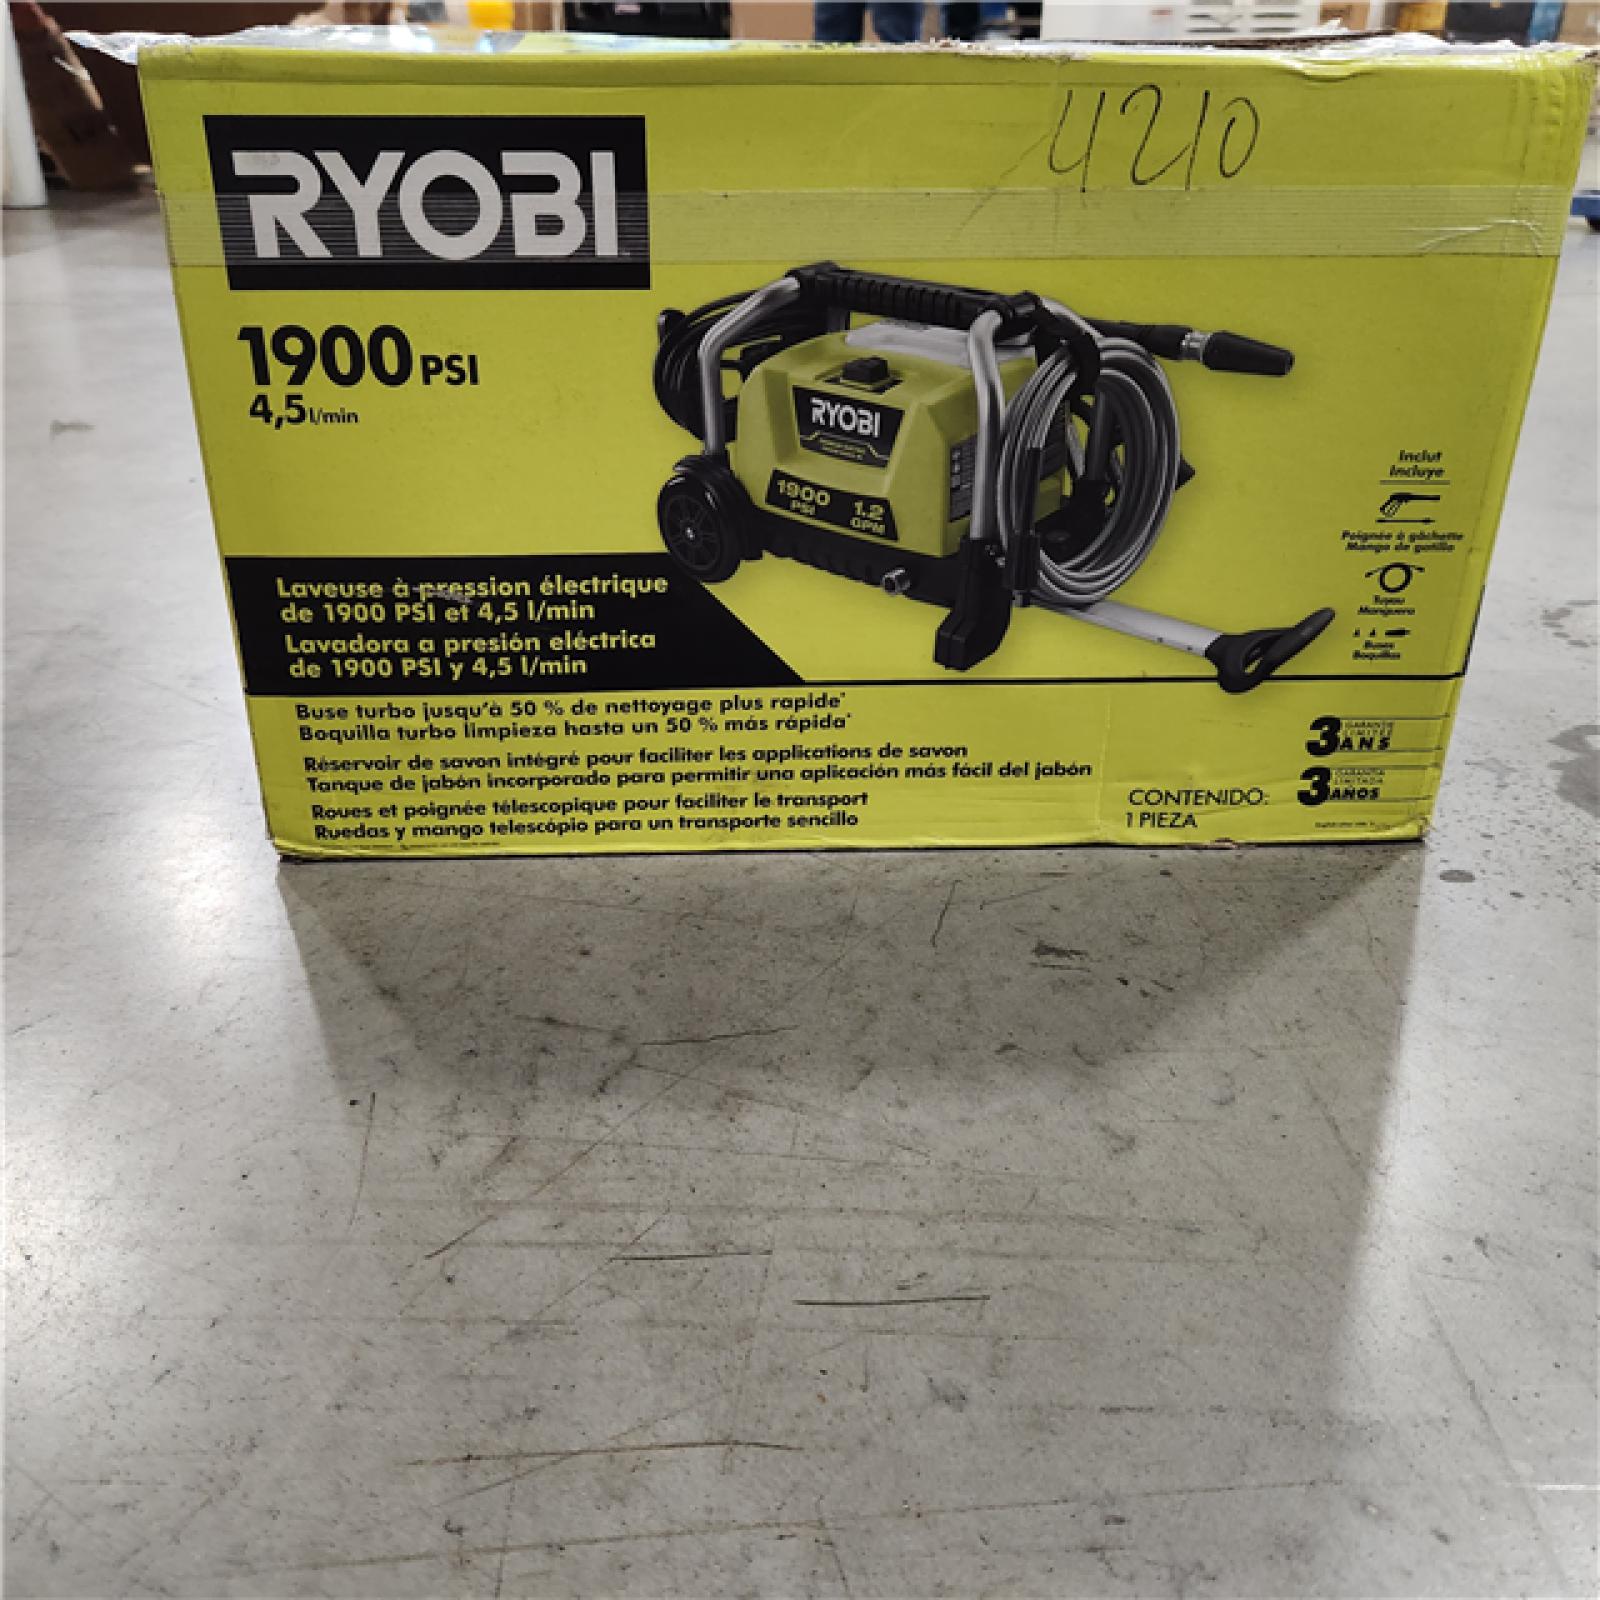 NEW - RYOBI 1900 PSI 1.2 GPM Cold Water Wheeled Corded Electric Pressure Washer